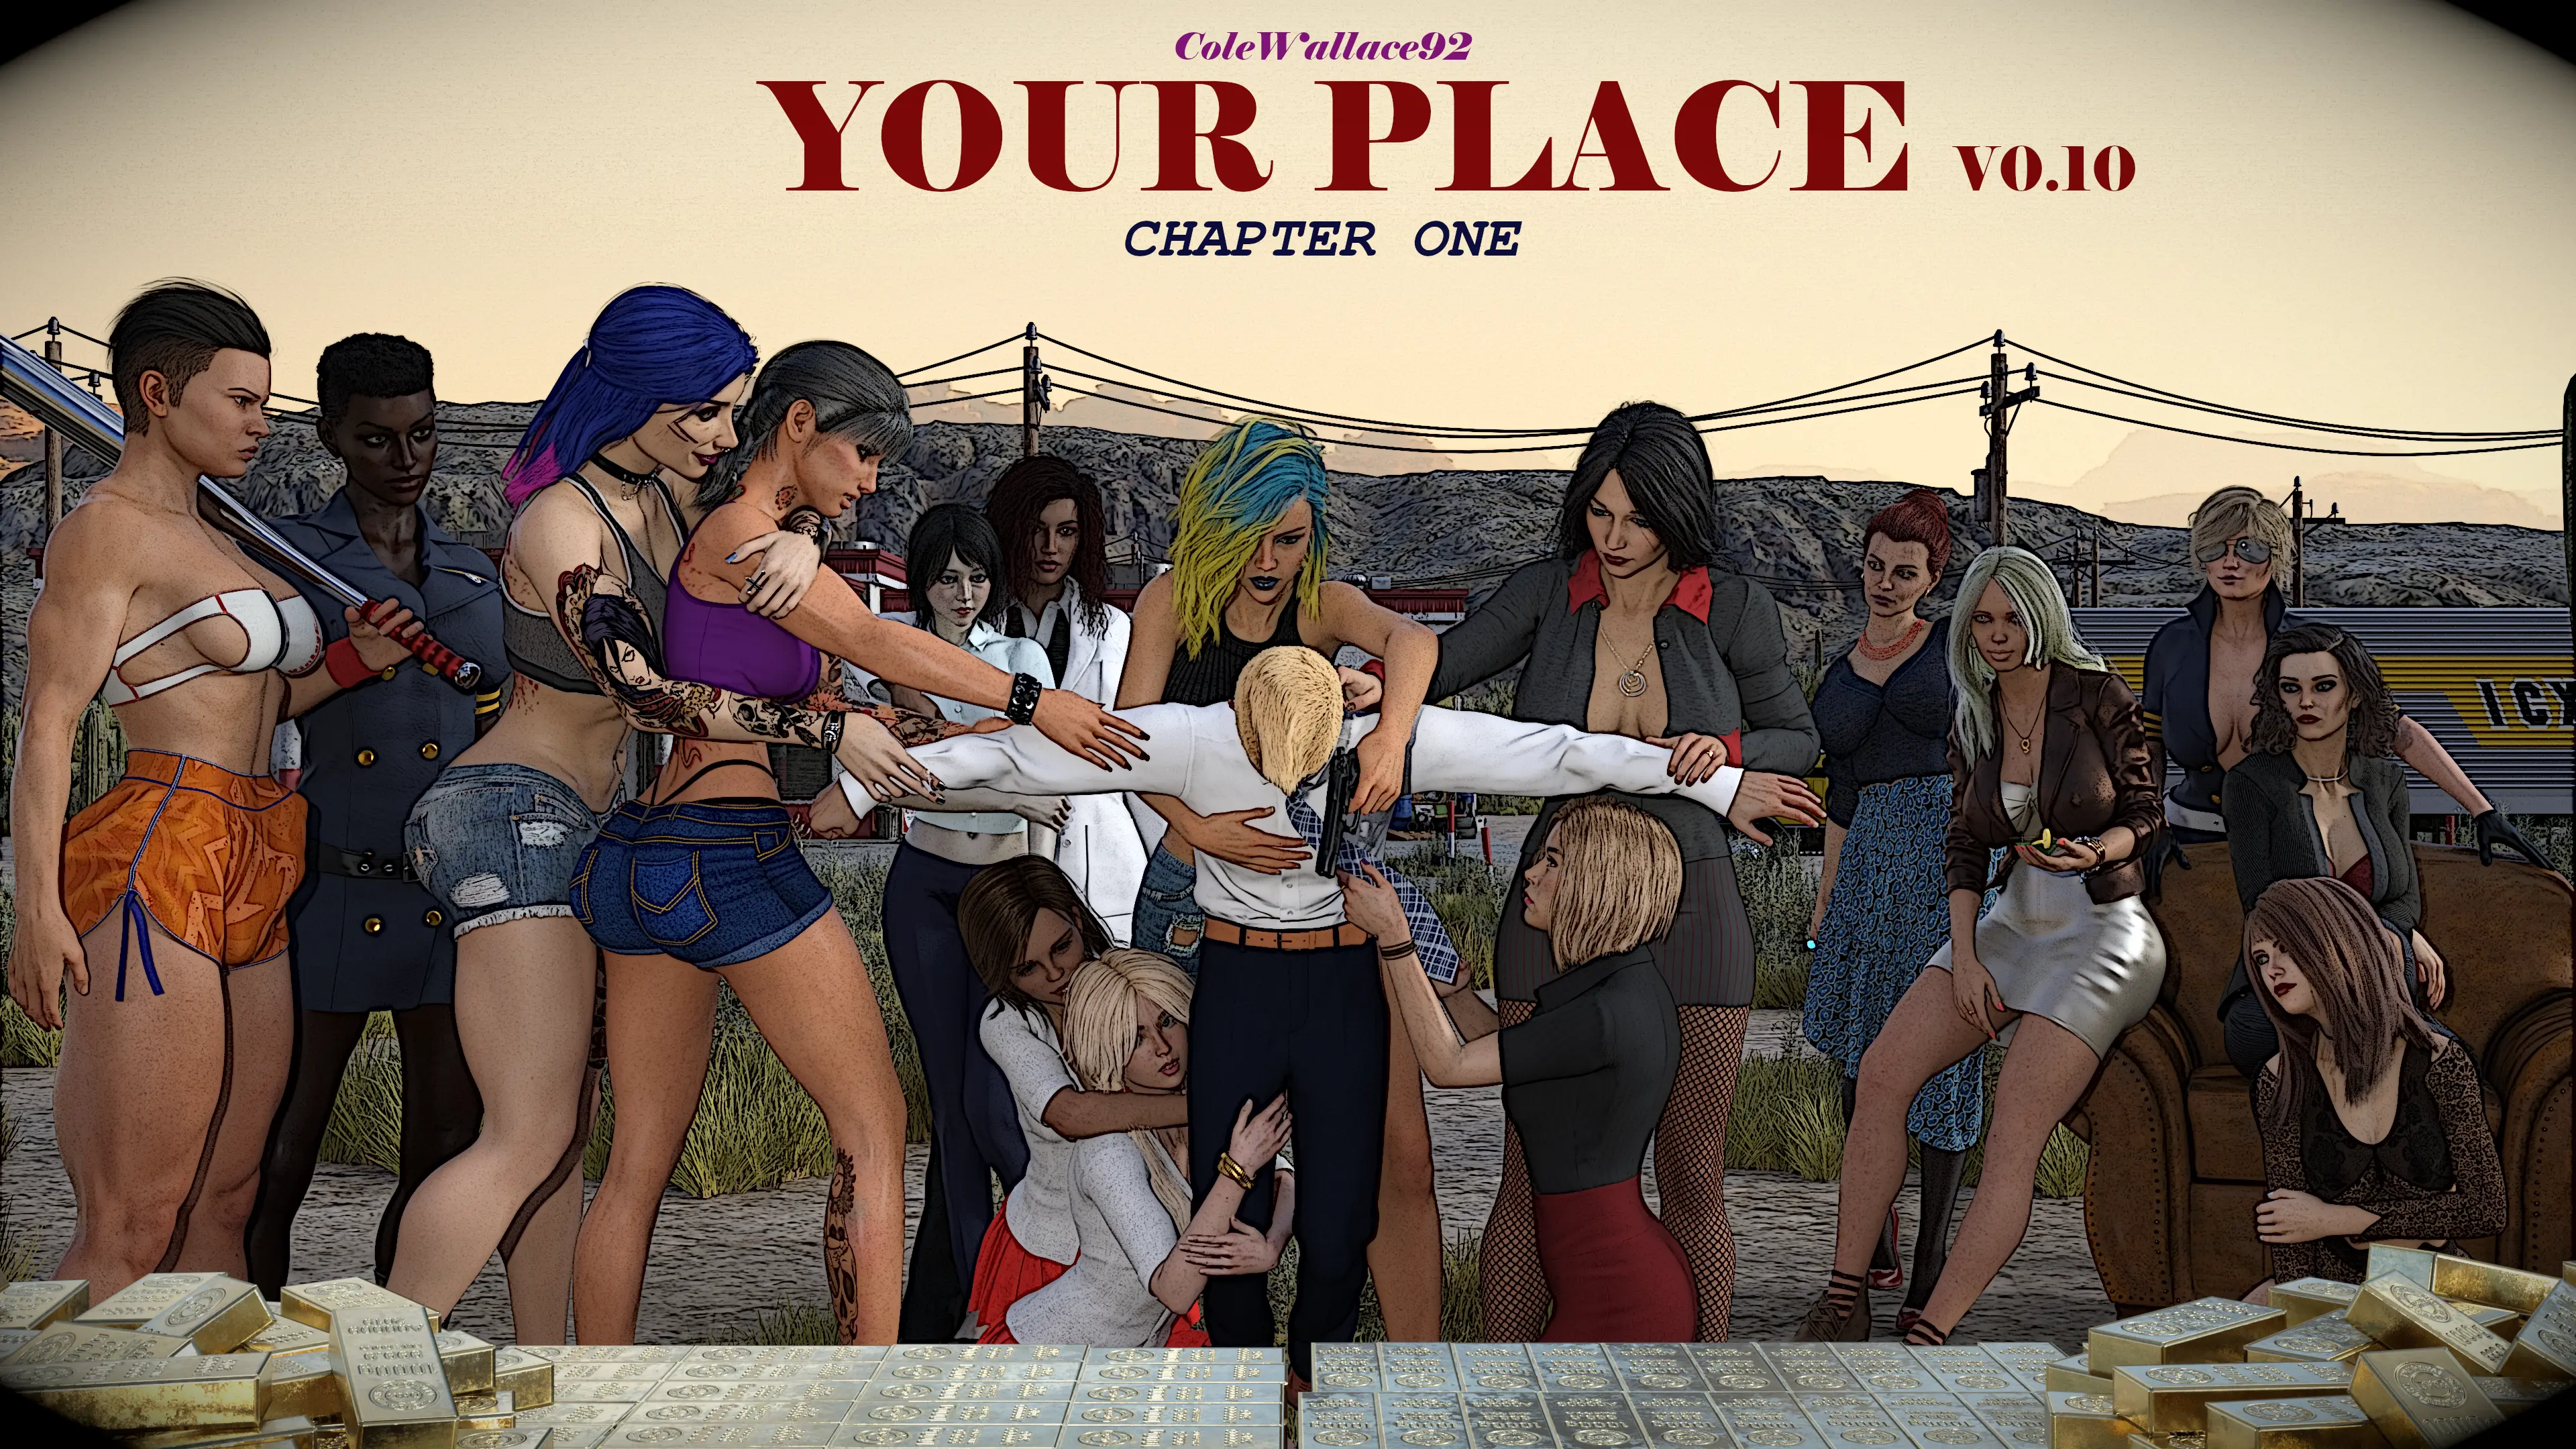 Your Place - Chapter 2 main image